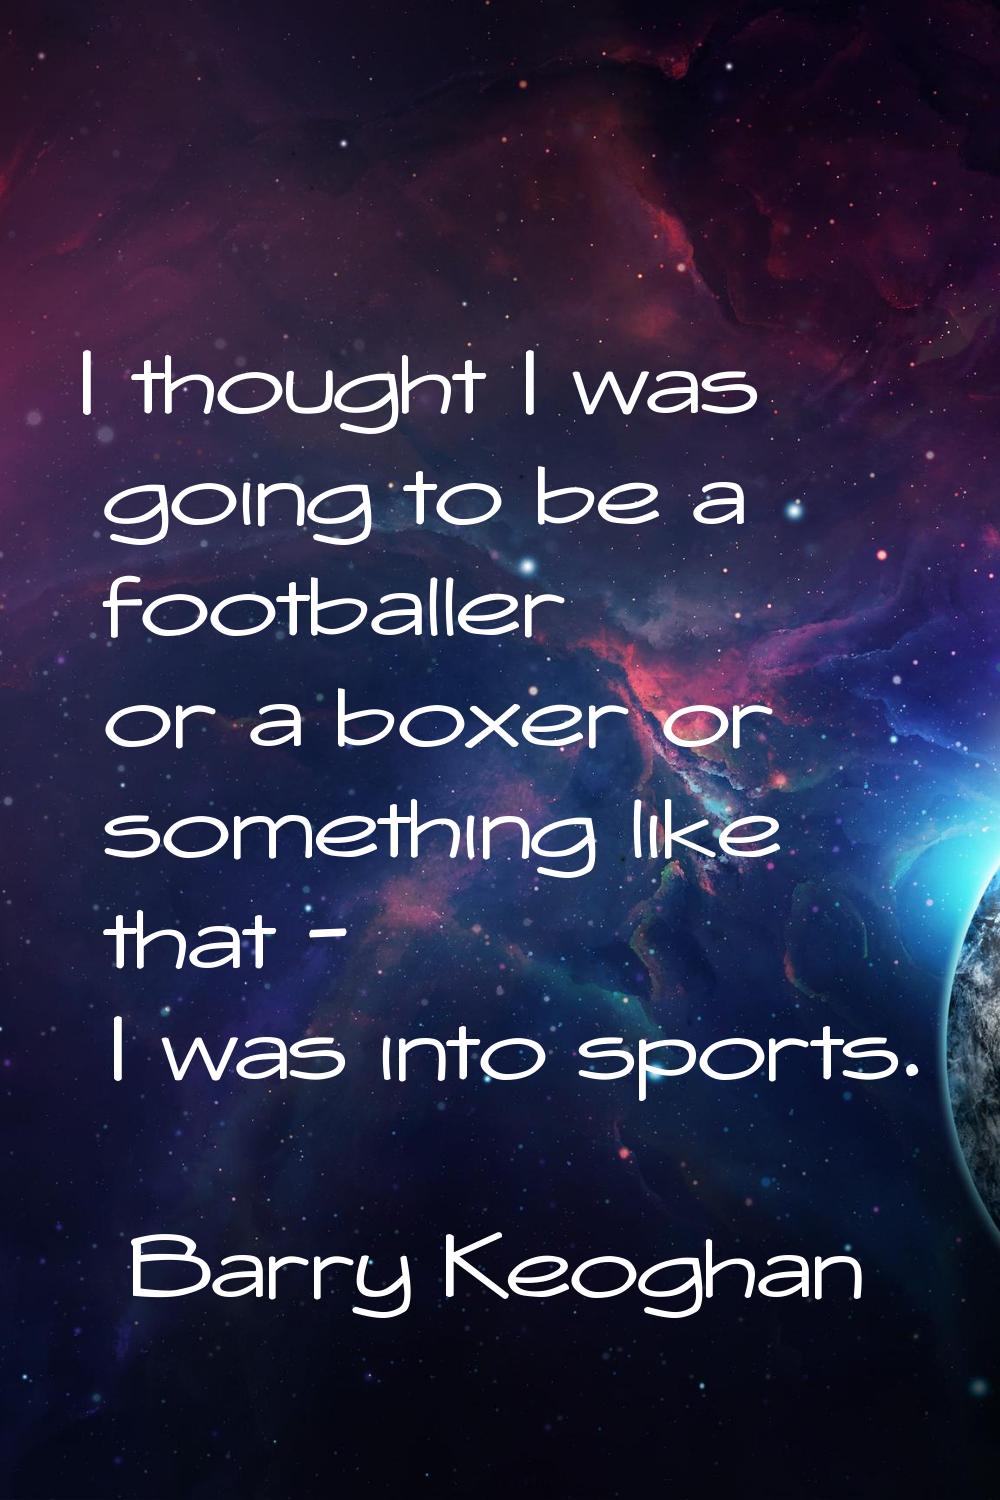 I thought I was going to be a footballer or a boxer or something like that - I was into sports.